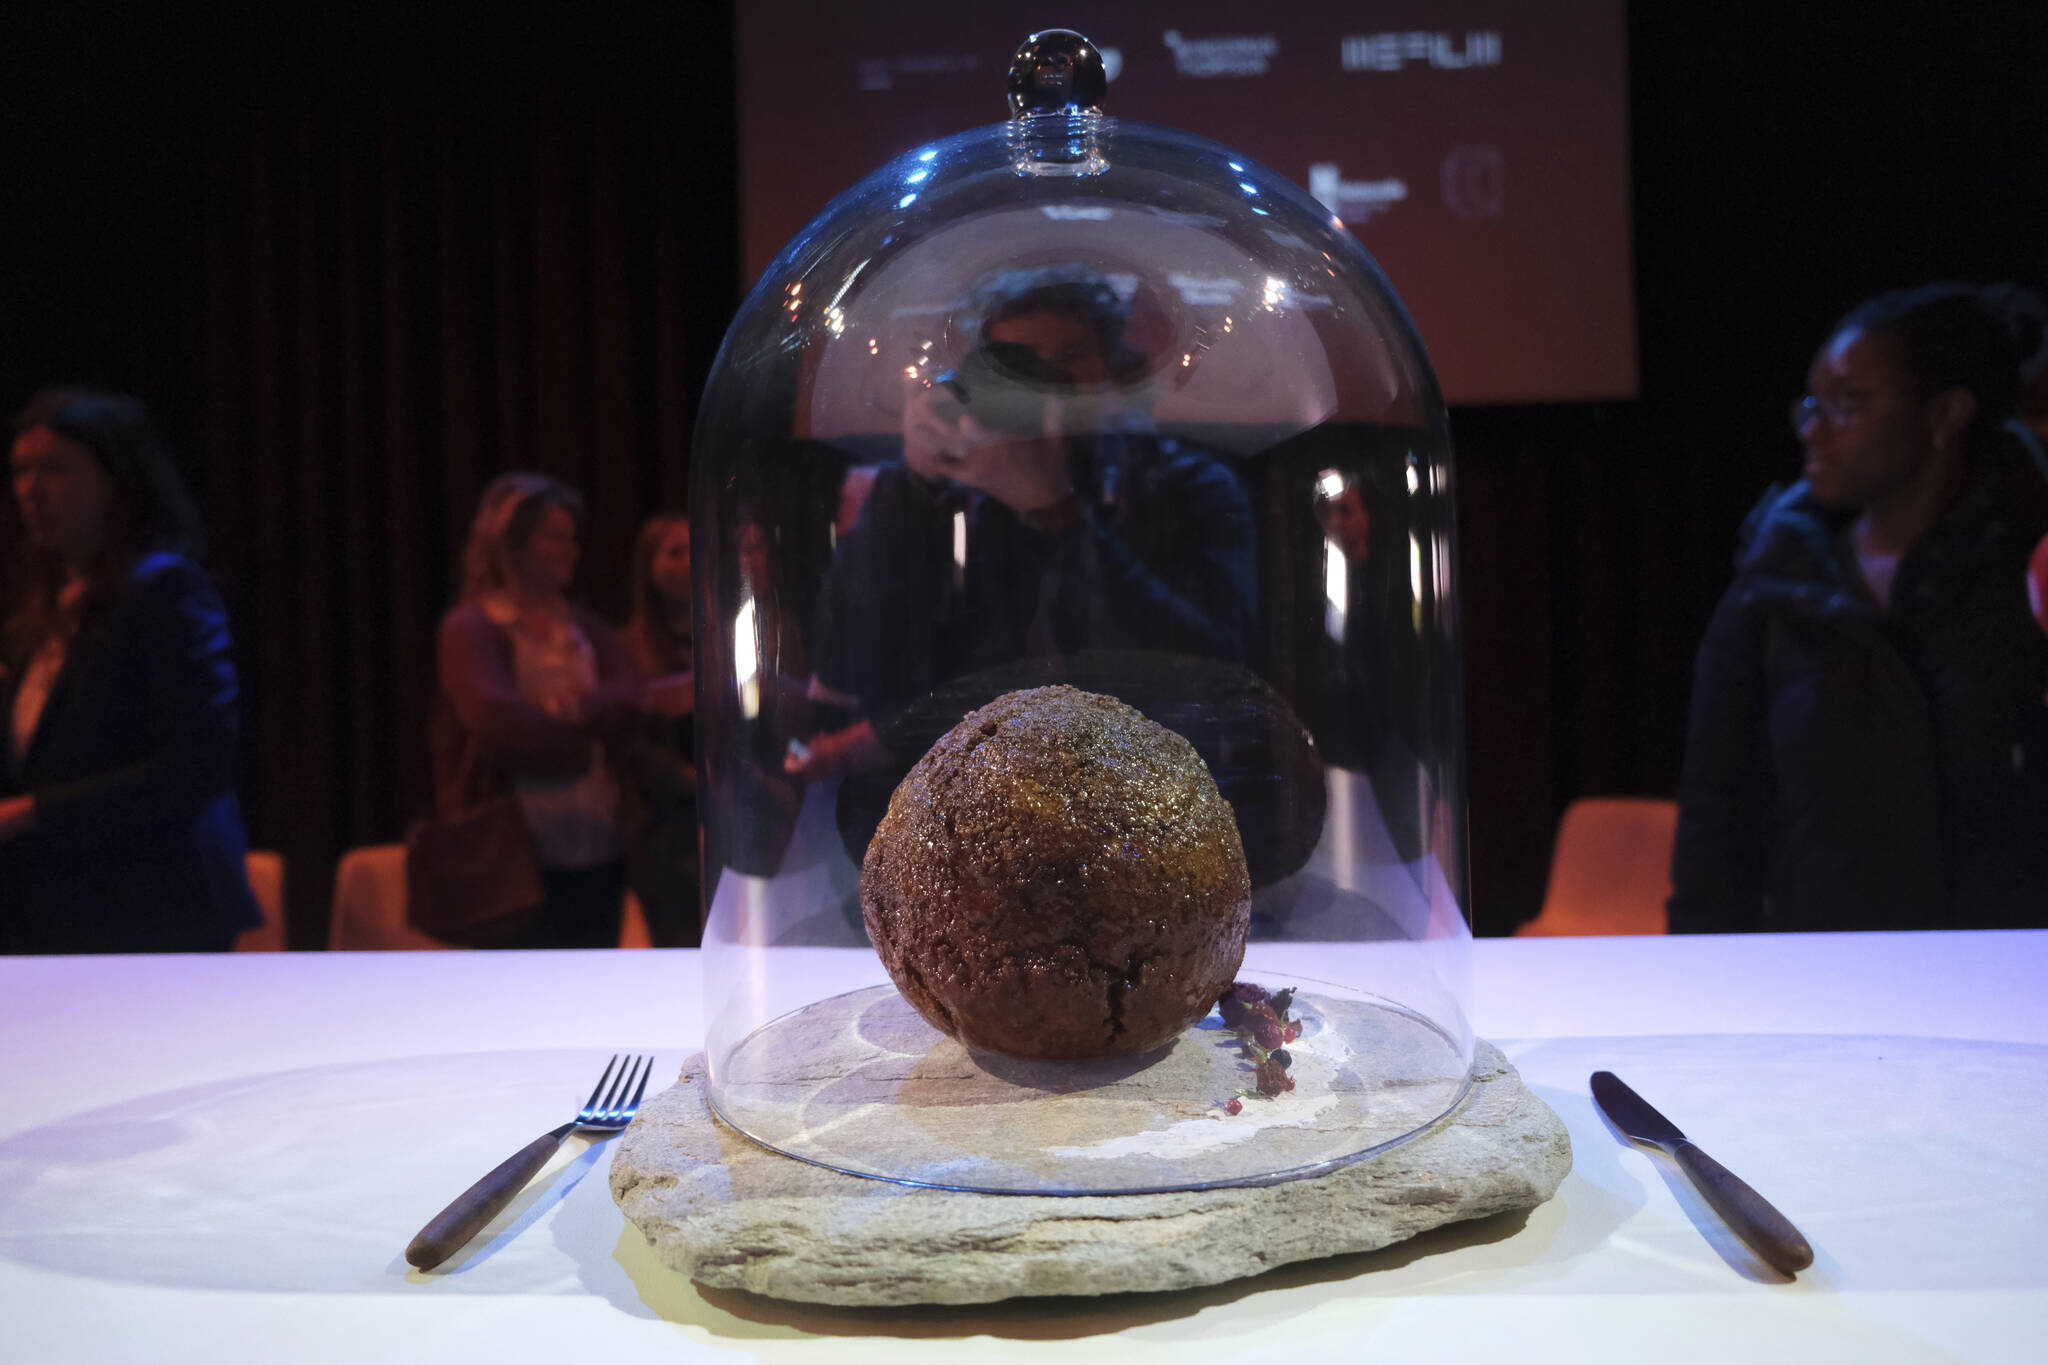 A meatball made using genetic code from the mammoth is seen at the Nemo science museum in Amsterdam, Tuesday March 28, 2023. An Australian company has lifted the glass cloche on a meatball made of lab-grown cultured meat using the genetic sequence from the long-extinct mastodon. The high-tech treat isn’t available to eat yet - the startup says it is meant to fire up public debate about cultivated meat. (AP Photo/Mike Corder)